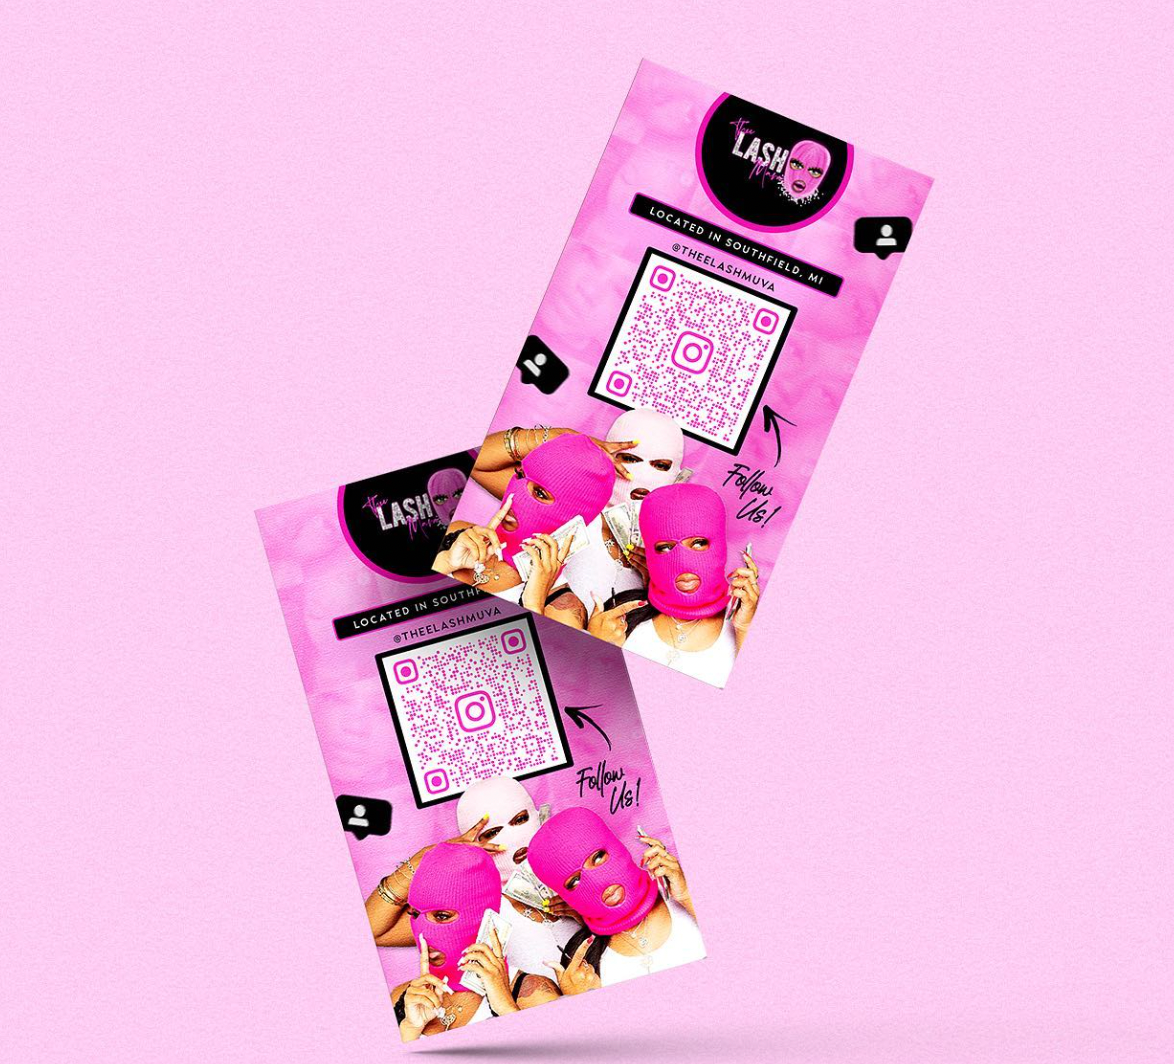 Pink business cards featuring an Instagram QR code and an image of 3 women wearing balaclavas.